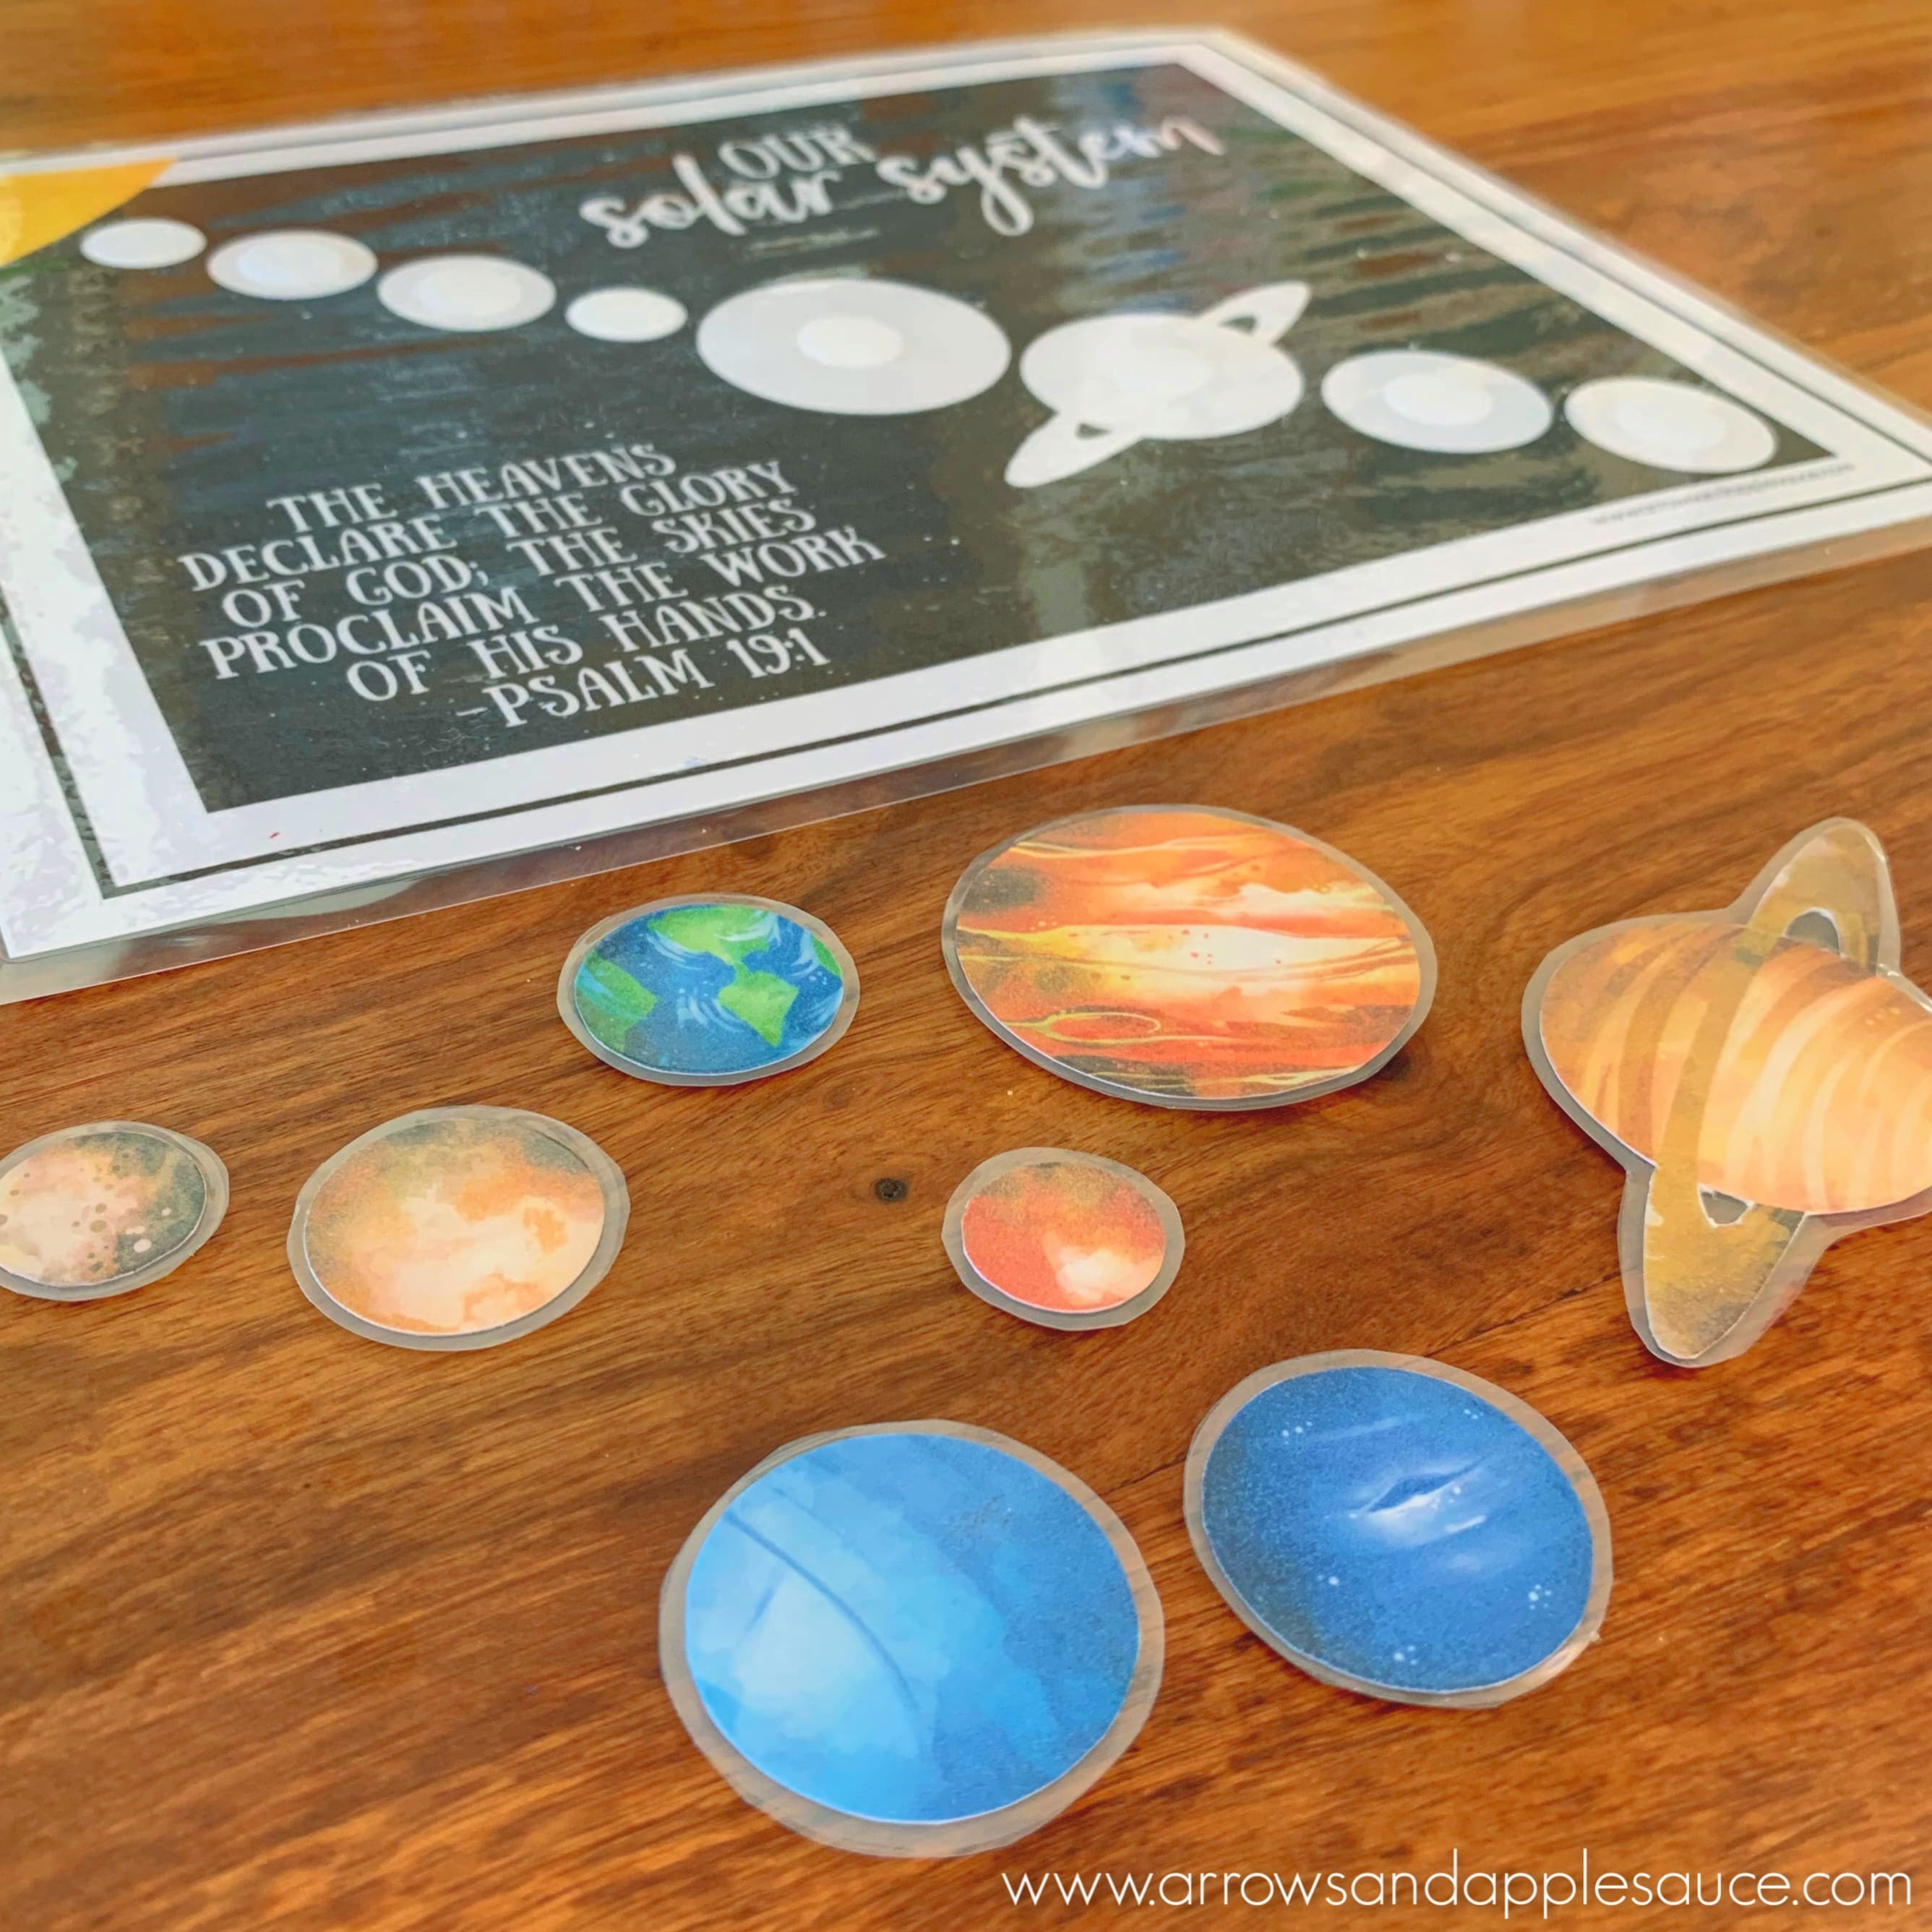 Learning about our amazing solar system is fun and easy with this printable memory game. Perfect for your homeschool science curriculum and a great addition to your busy binder. #homeschoolprintable #homeschoolscience #solarsystemactivity #kidsscienceactivity #learningaboutplanets #preschoolcurriculm #kindergarten#printablecurriculum #theheavensdeclarehisglory